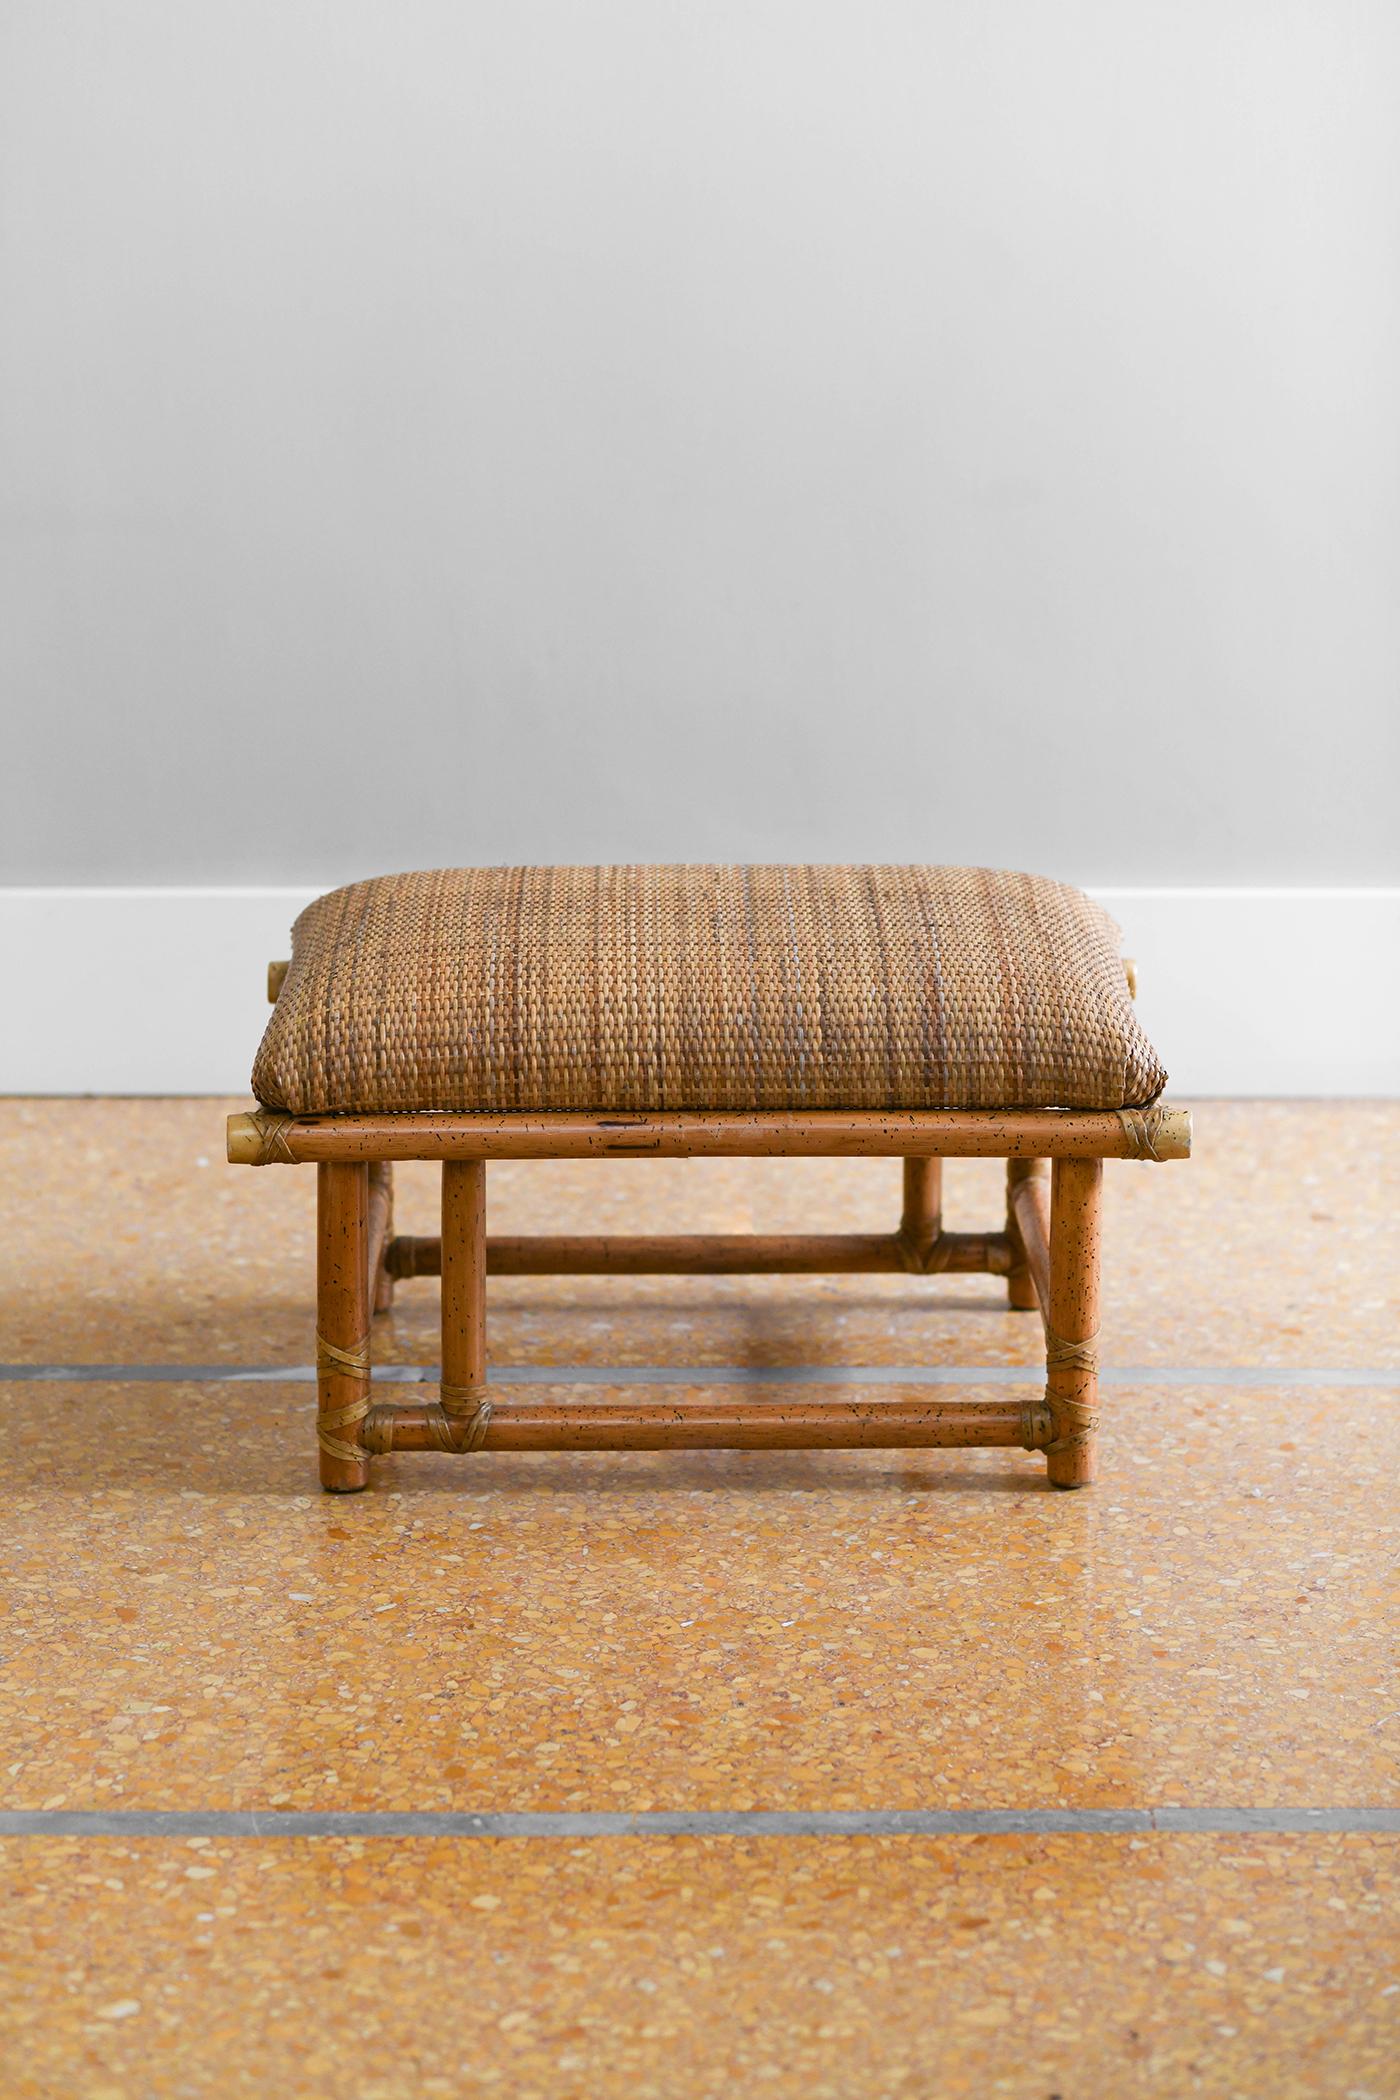 Pair of rattan and rush poufs with leather bindings, Prod. McGuire San Francisco 2